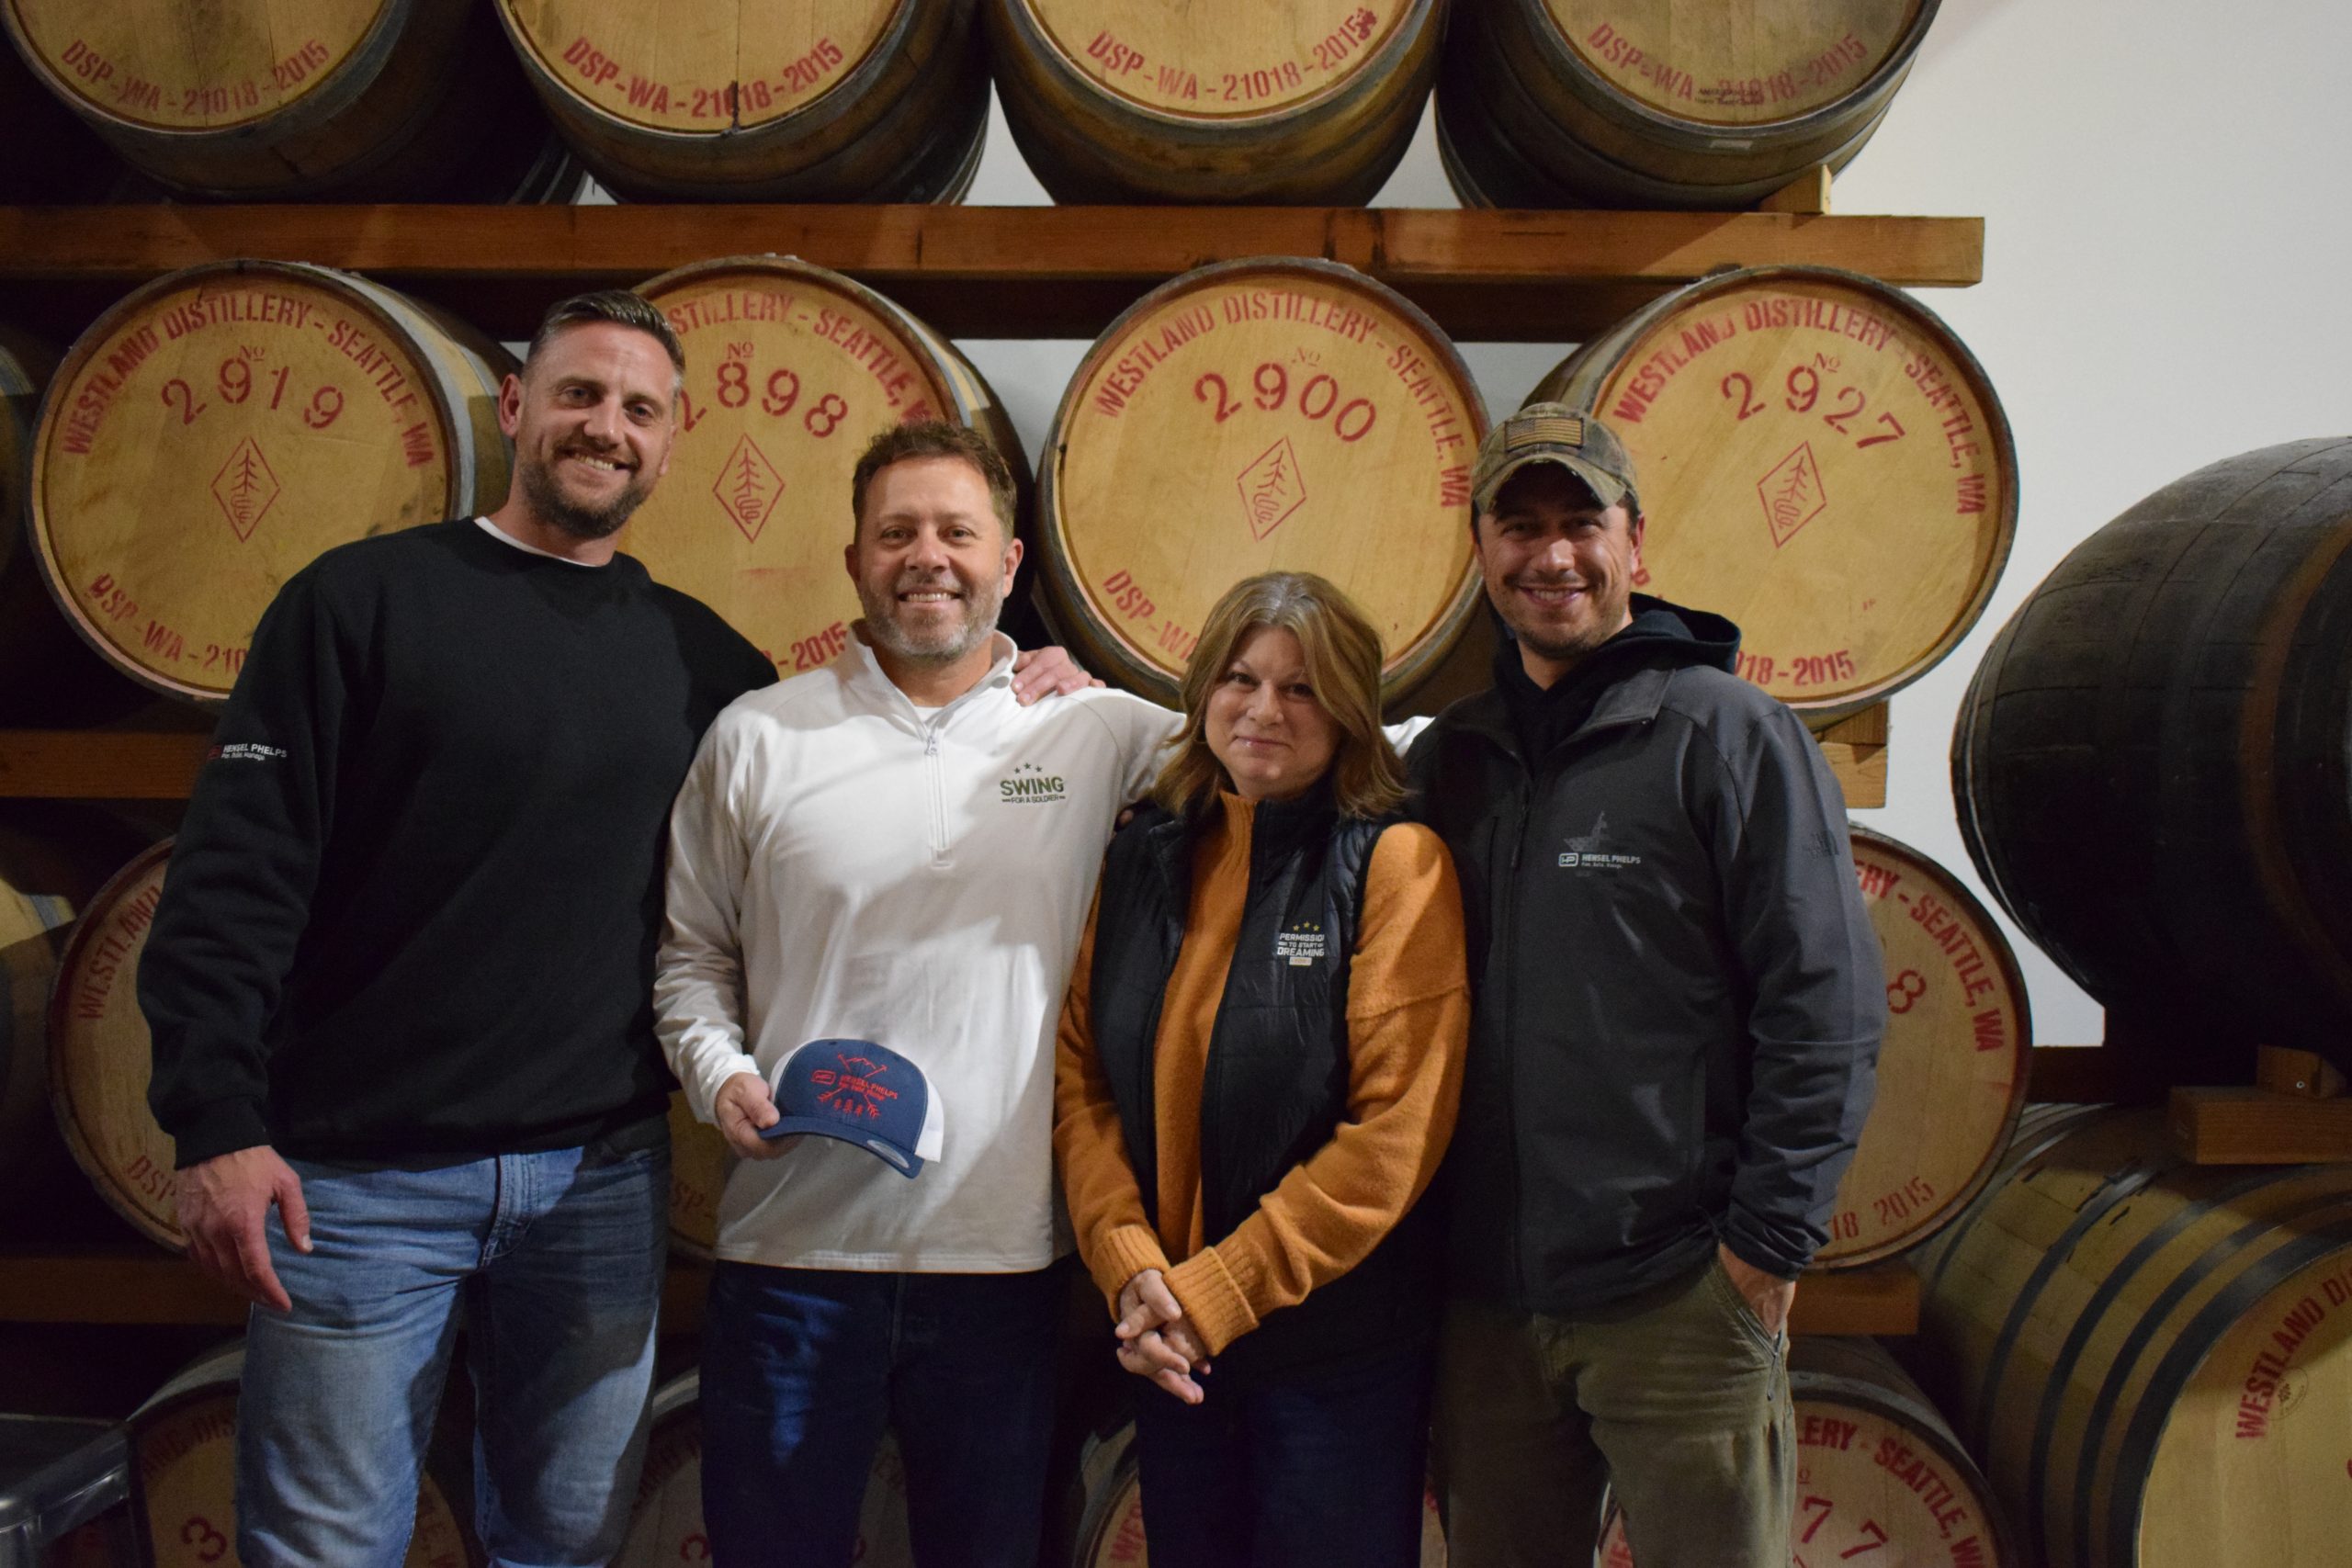 Hensel Phelps and Permission to Start Dreaming at Westland Distillery